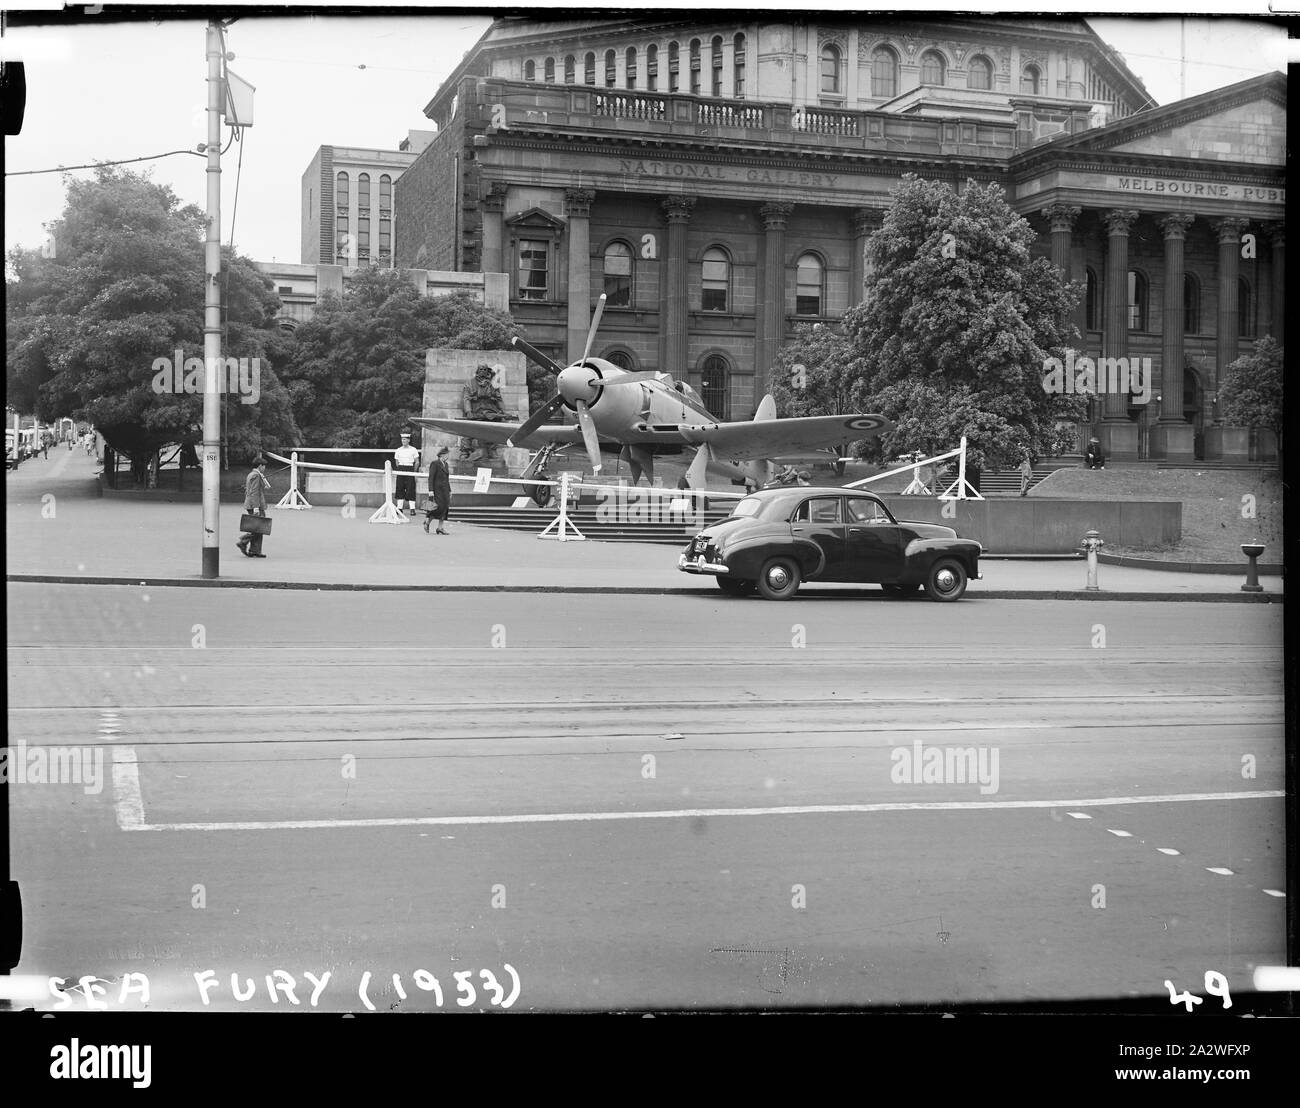 Glass Negative - Sea Fury Military Bomber Aircraft at the Jubilee of Flight Exhibition, Museum of Applied Science of Victoria (Science Museum), Melbourne, 1953, Photograph of the Royal Australian Navy's Sea Fury Military Bomber Aircraft outside the Museum of Applied Science, Swanston Street, 1953. The Sea Fury was loaned to the Museum for its Jubilee of Flight Exhibition, which commemorated fifty years of aviation. The exhibition was open to the public from Dec 10 1953 until Feb 1954 Stock Photo